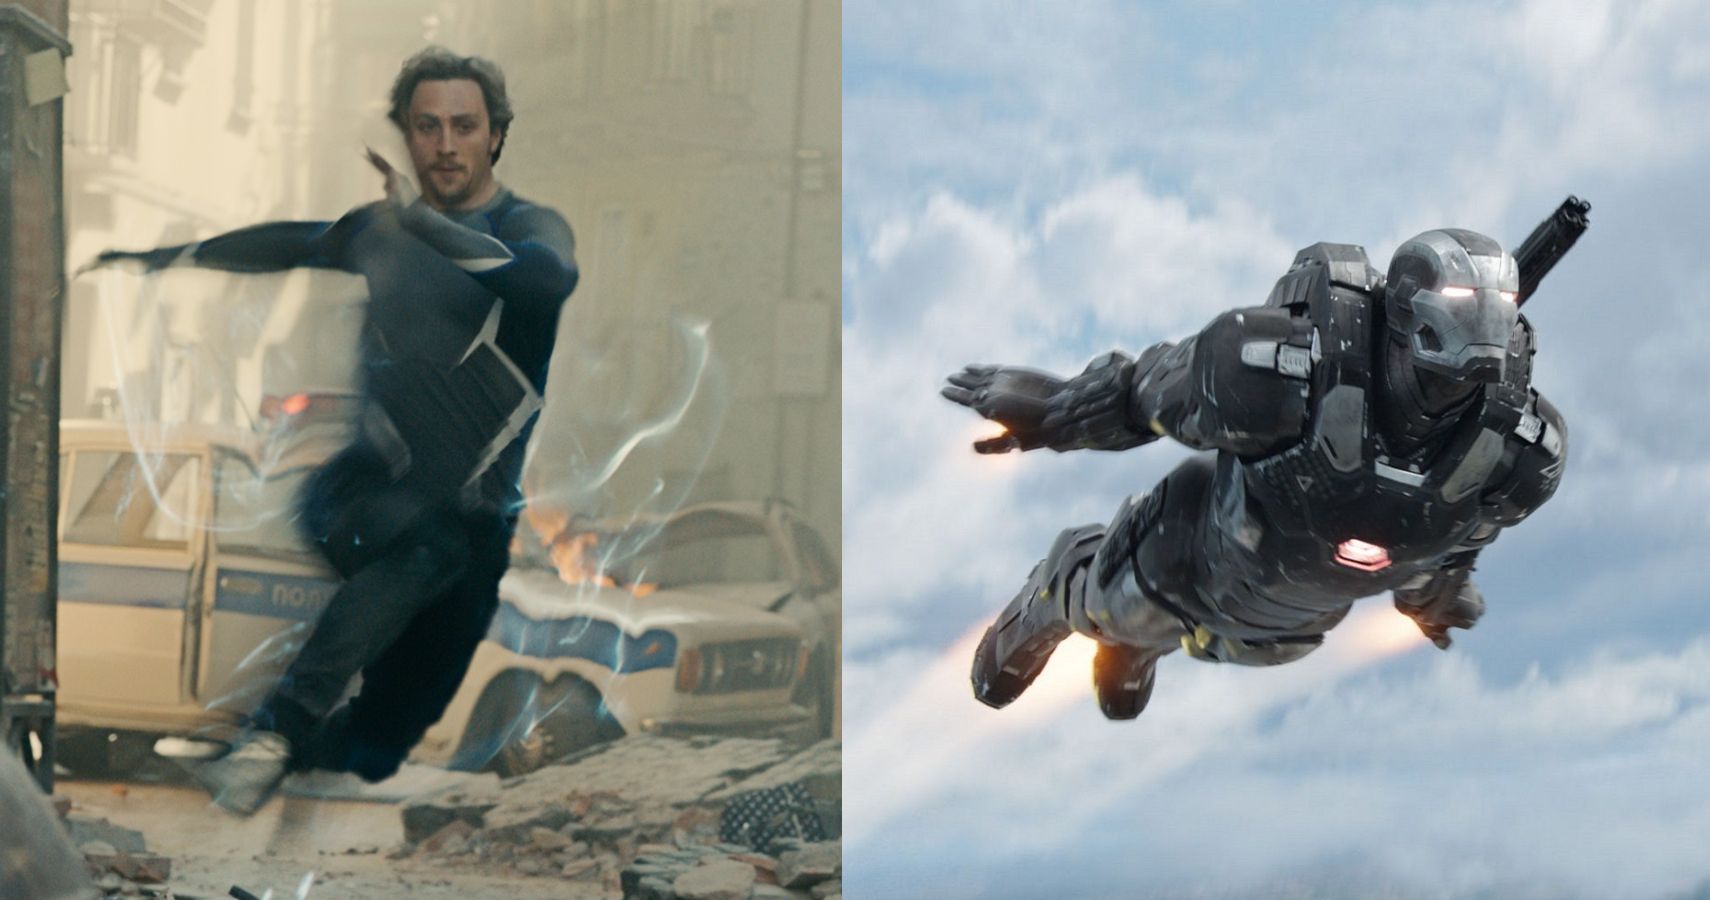 The 10 Fastest Characters In The MCU Ranked by Speed